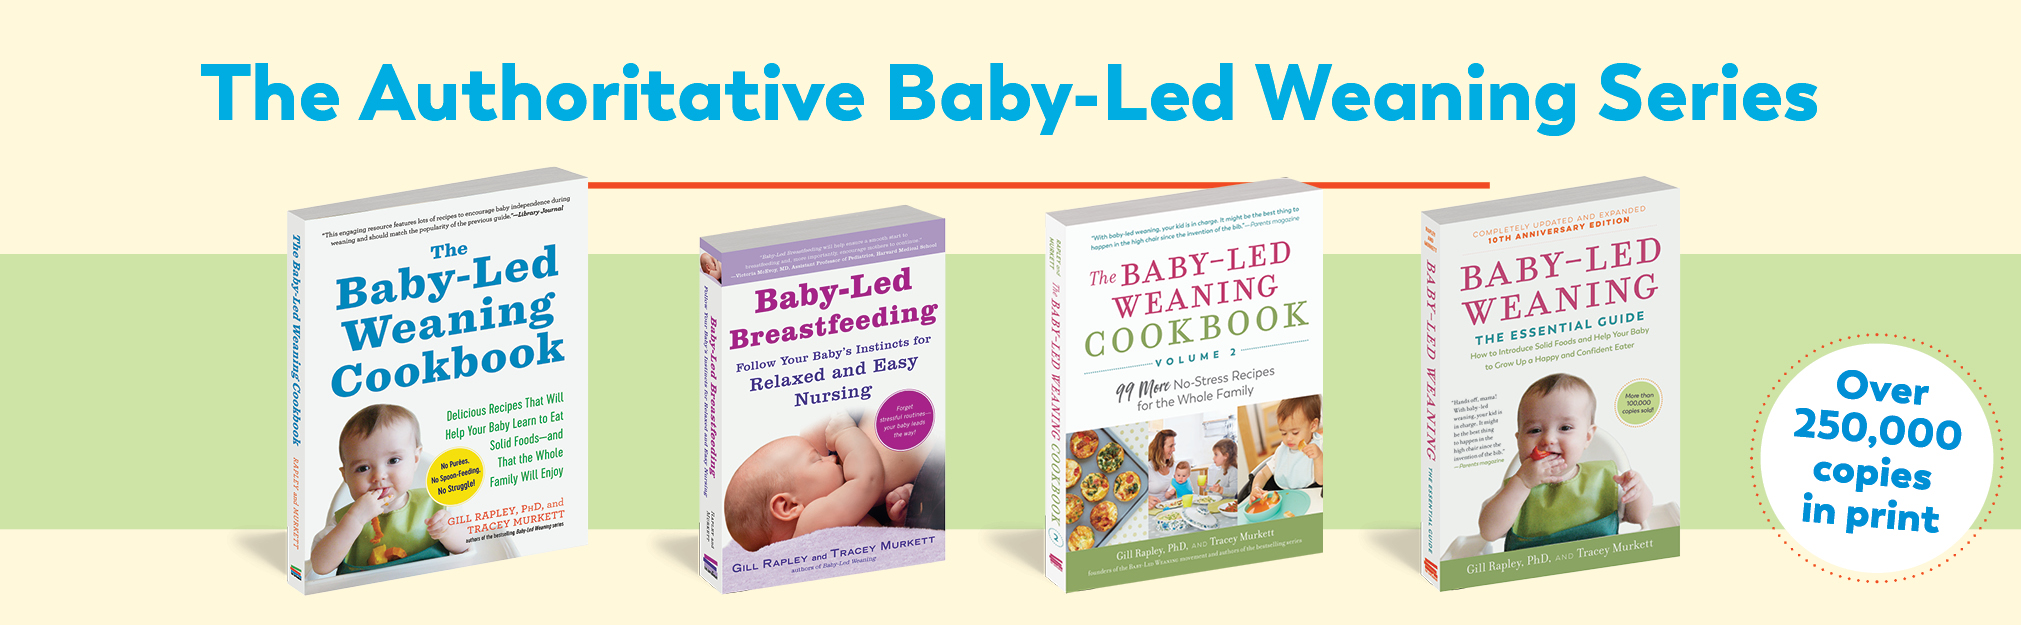 The Complete Guide to Baby-Led Weaning (Paperback)